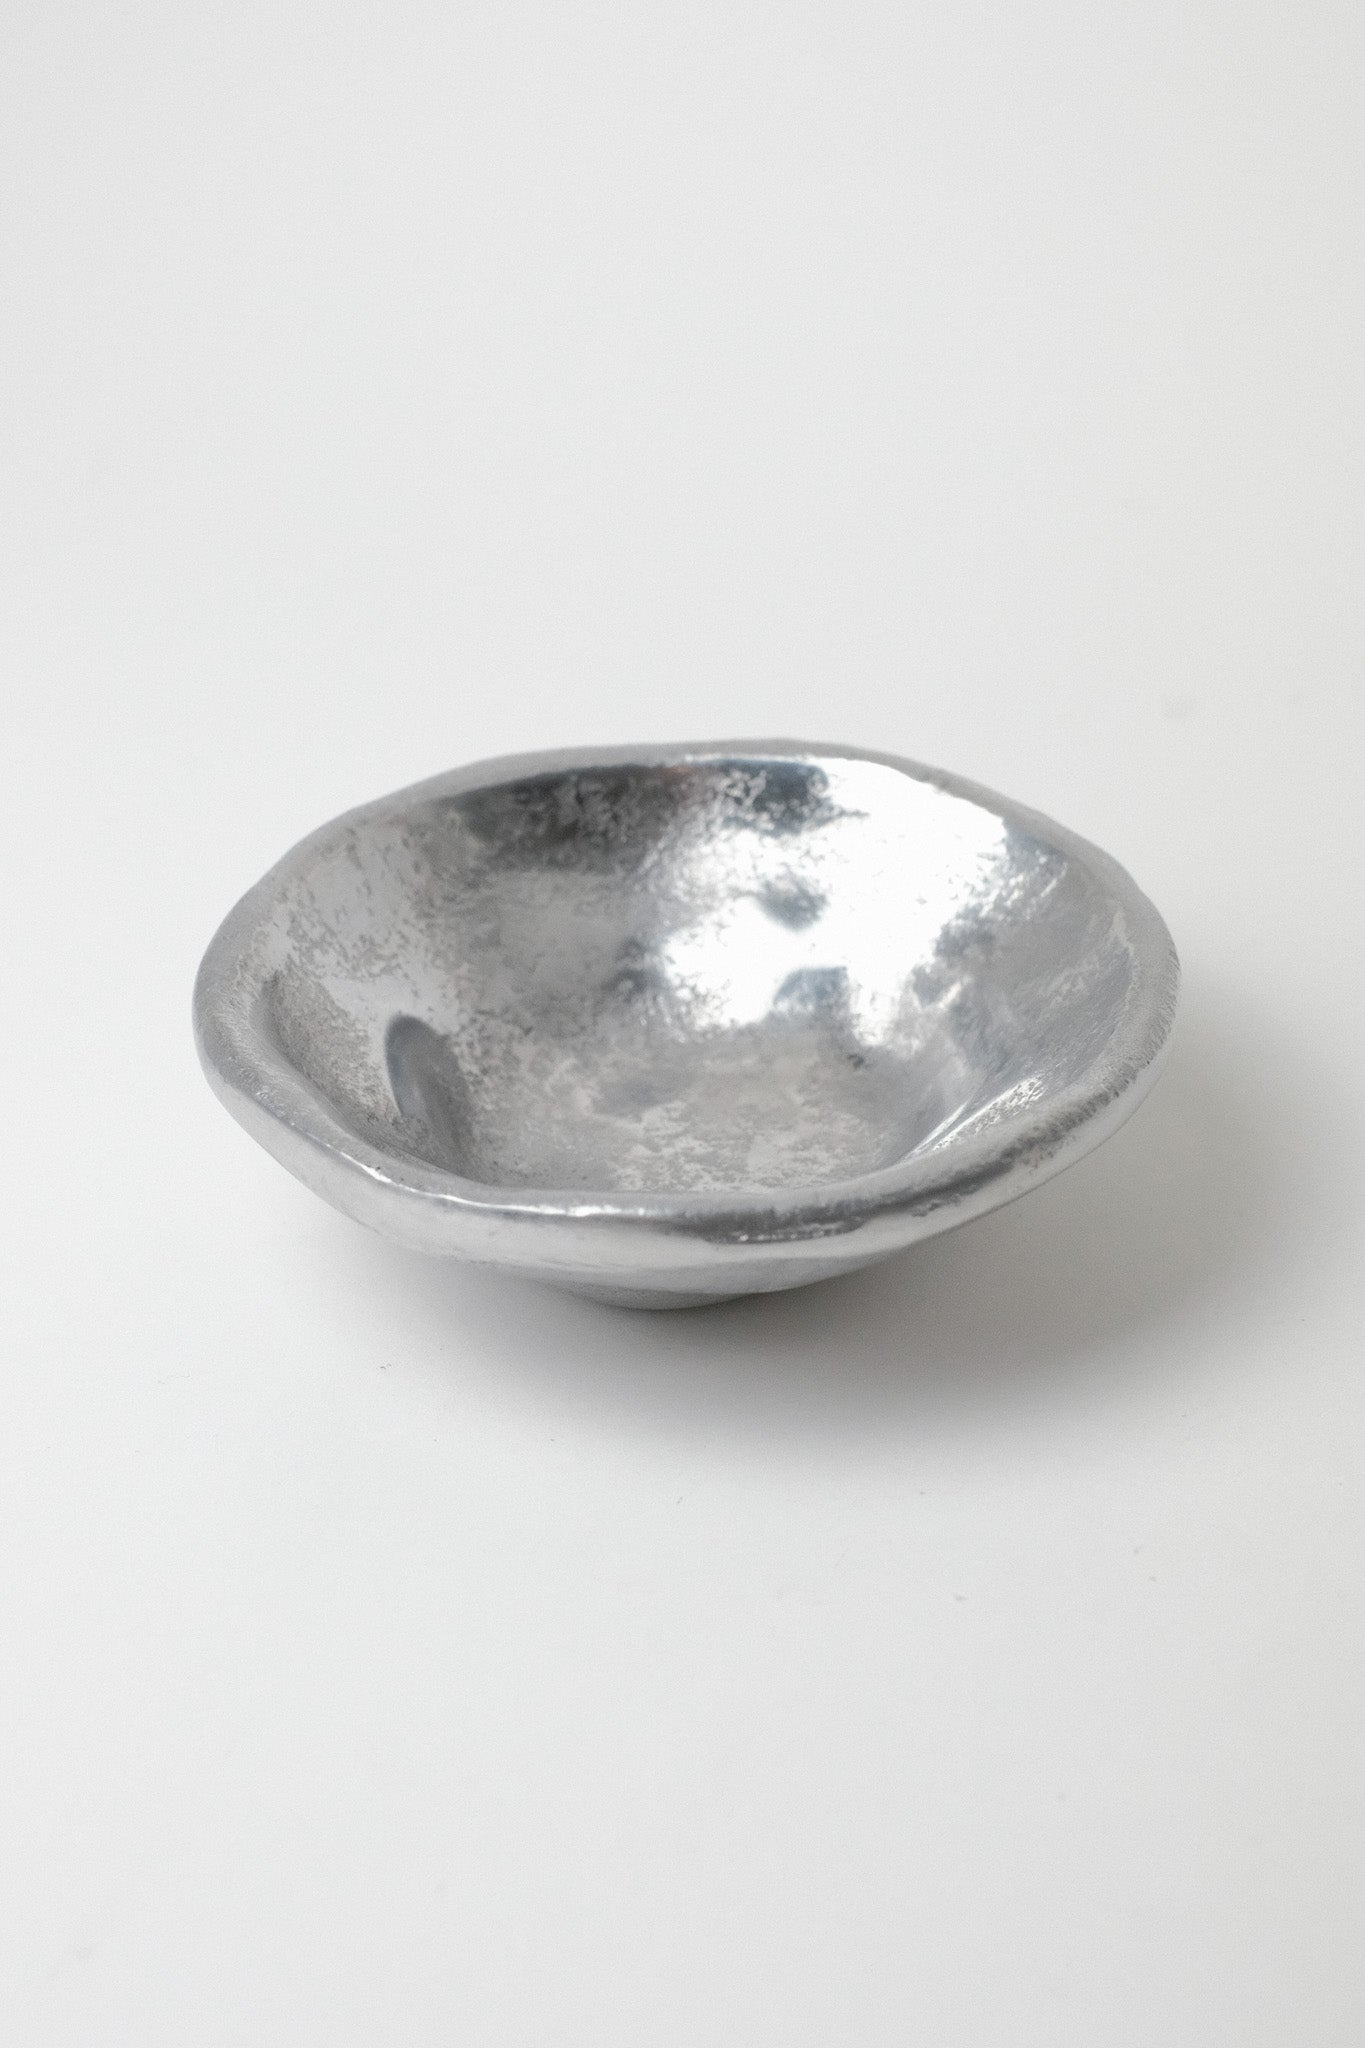 Silver Textured Serving Bowl